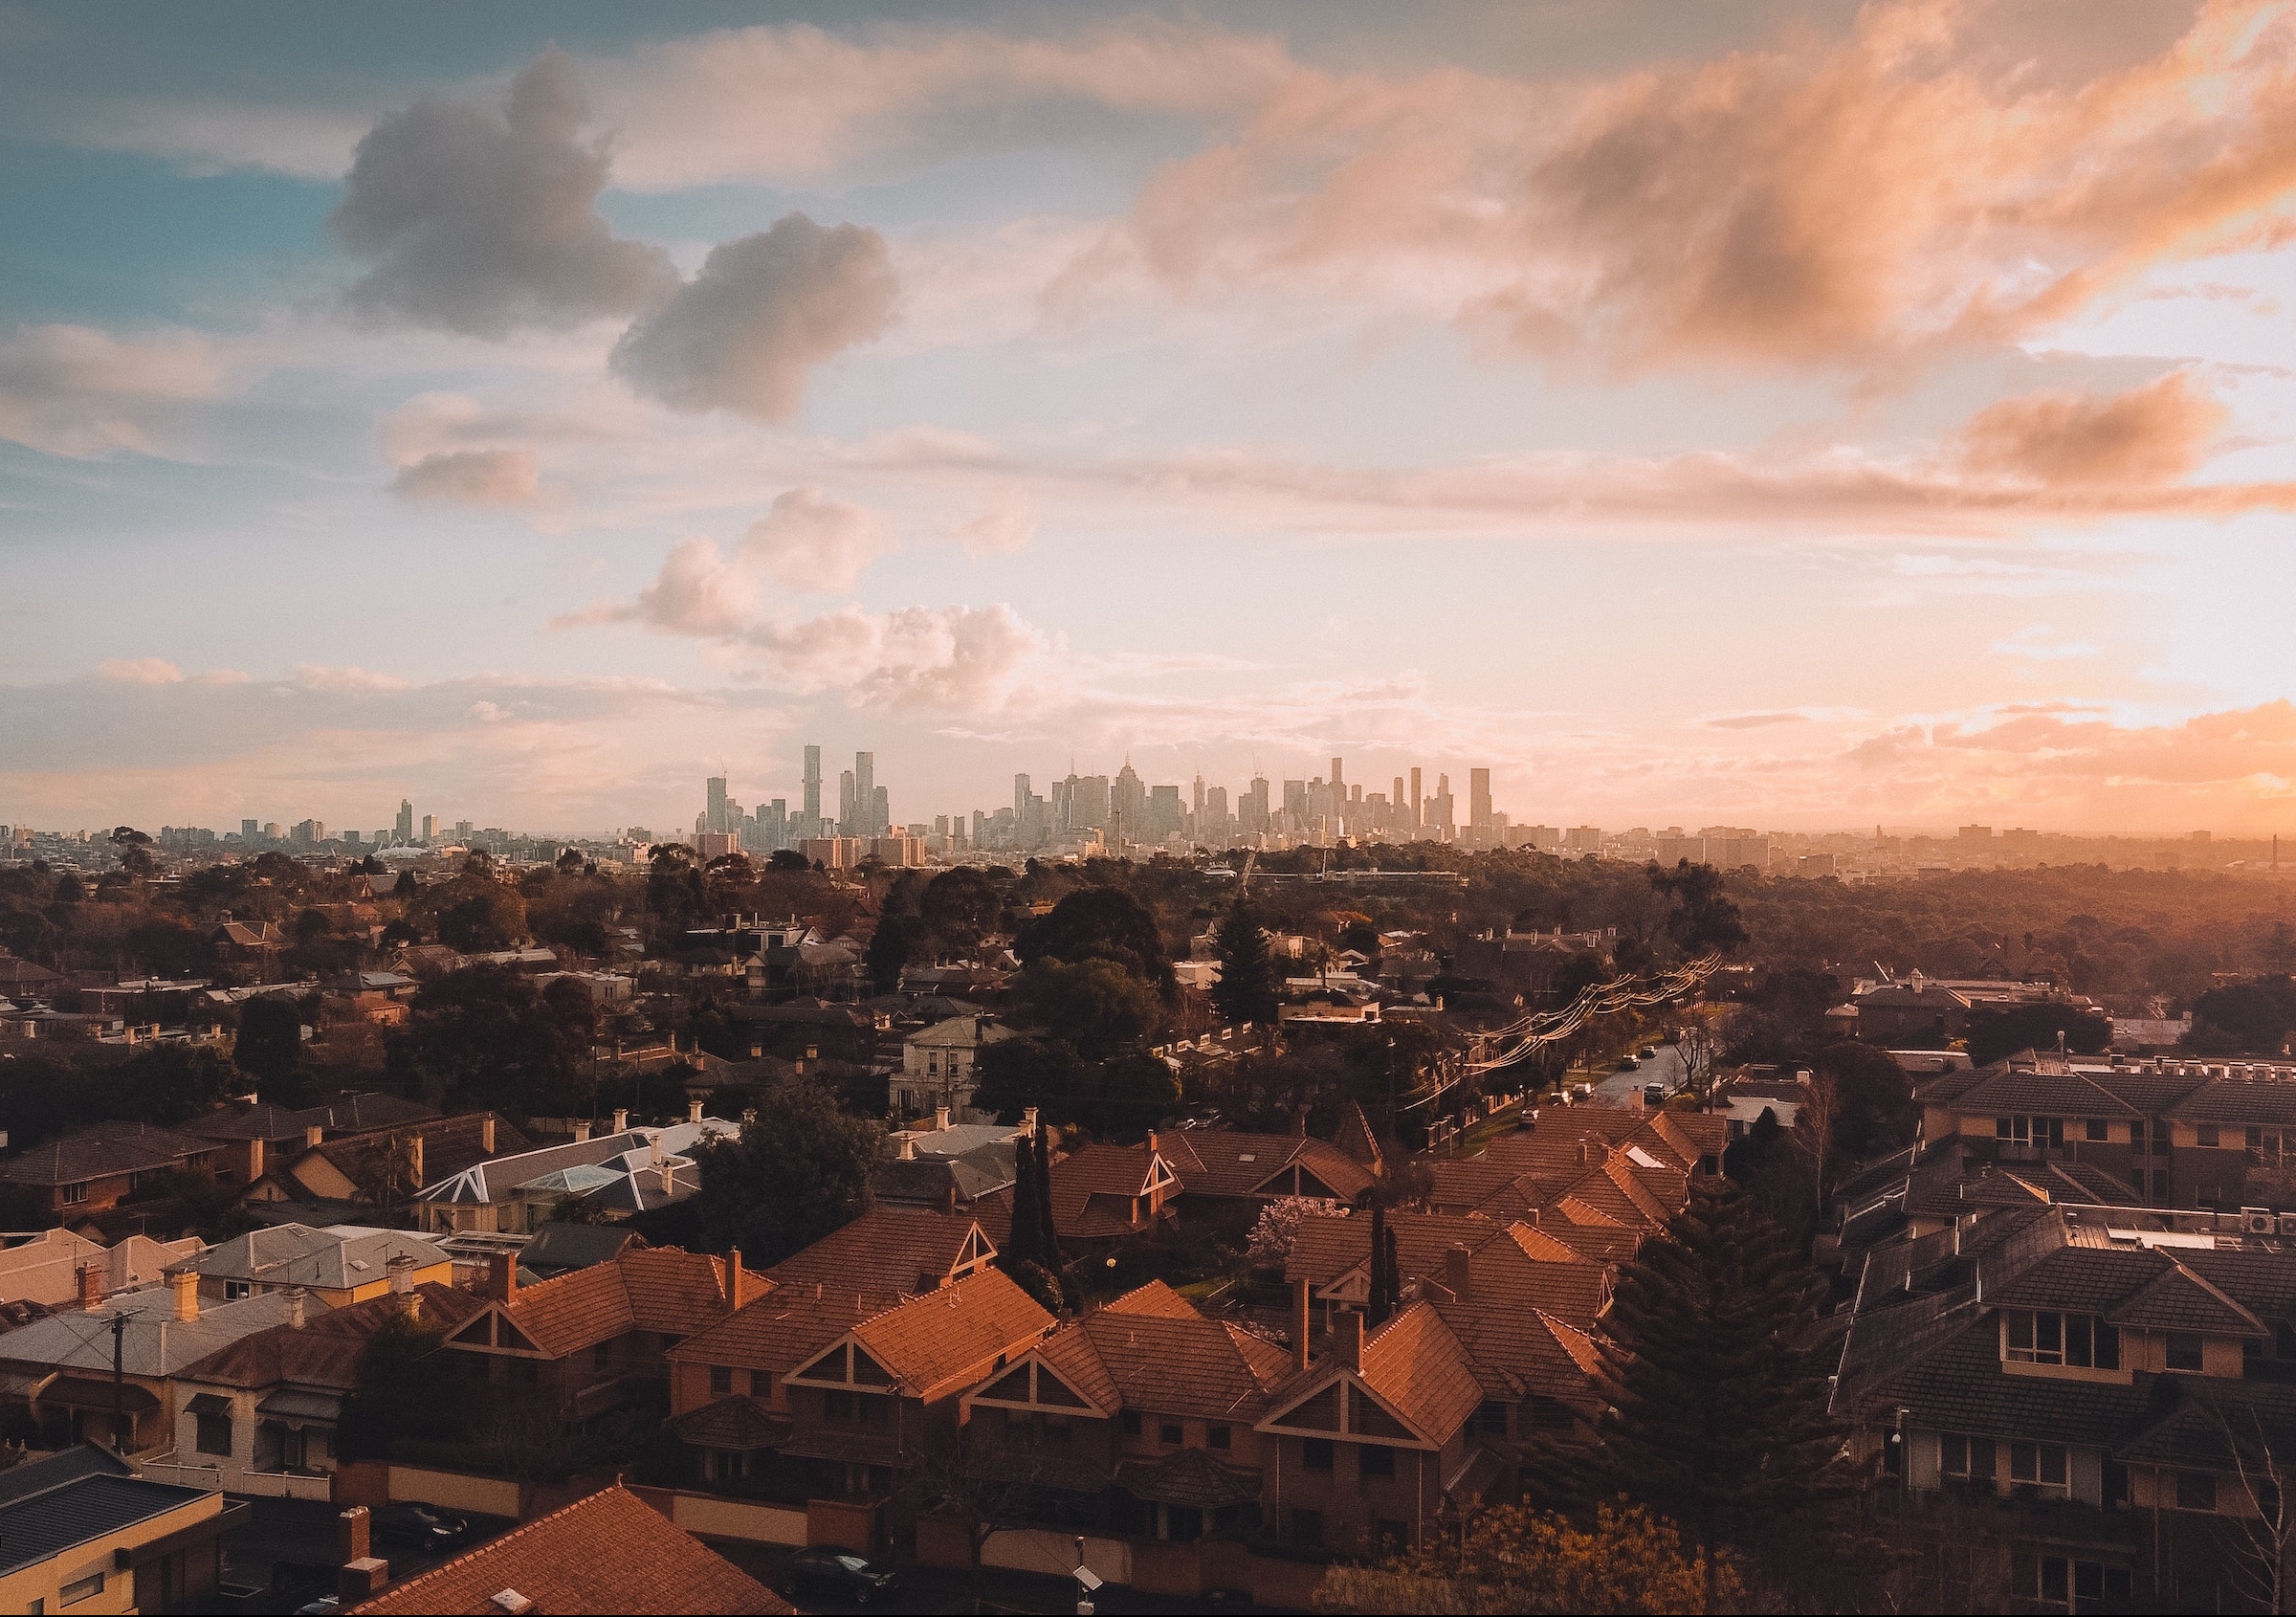 There are many barriers to stable long-term housing for low-income Australians. Photo: Unsplash.